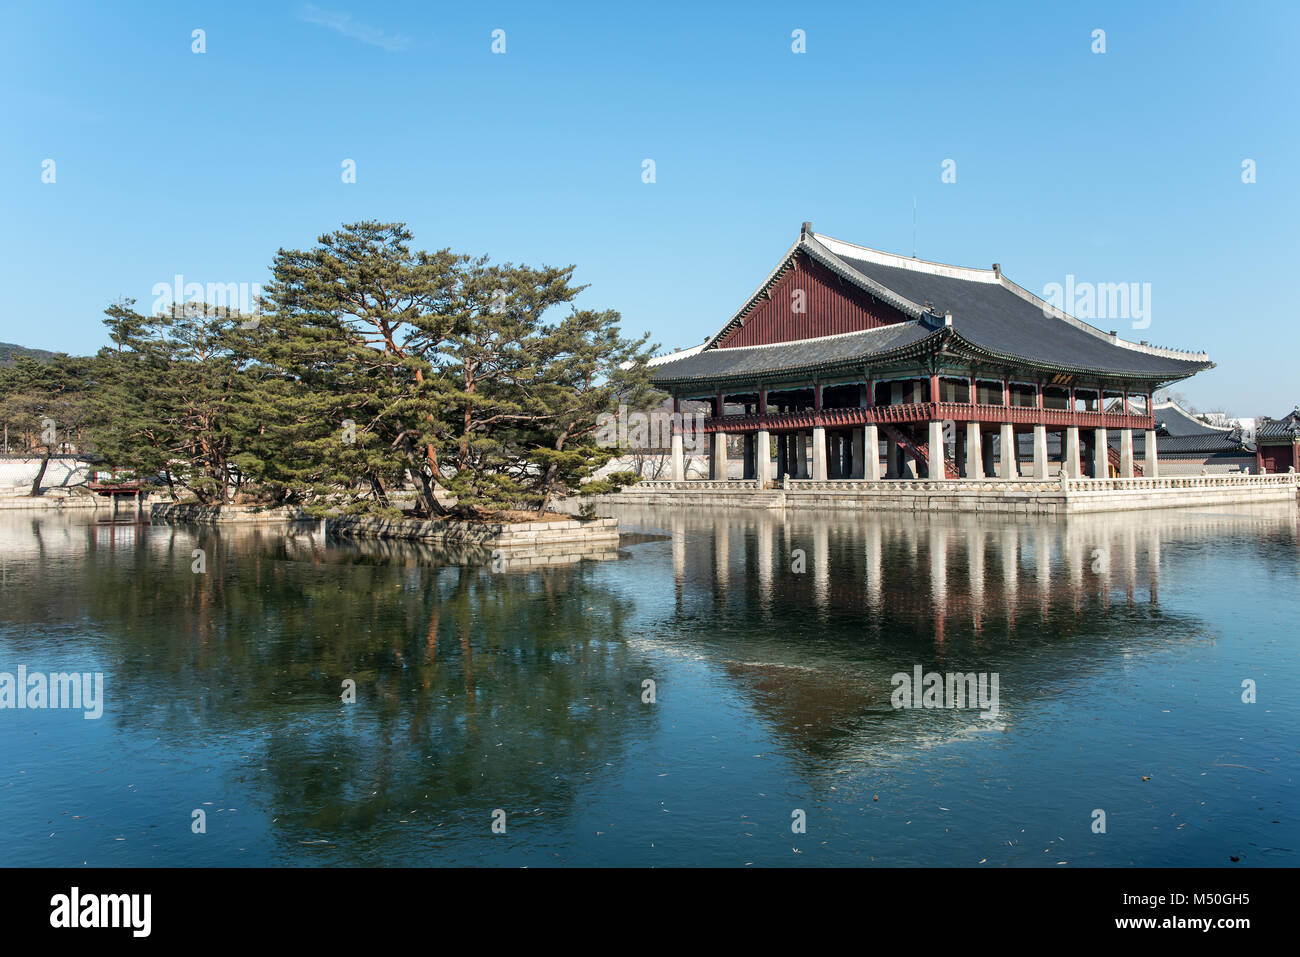 Seoul, Korean traditional architecture, sky, asian roof Stock Photo